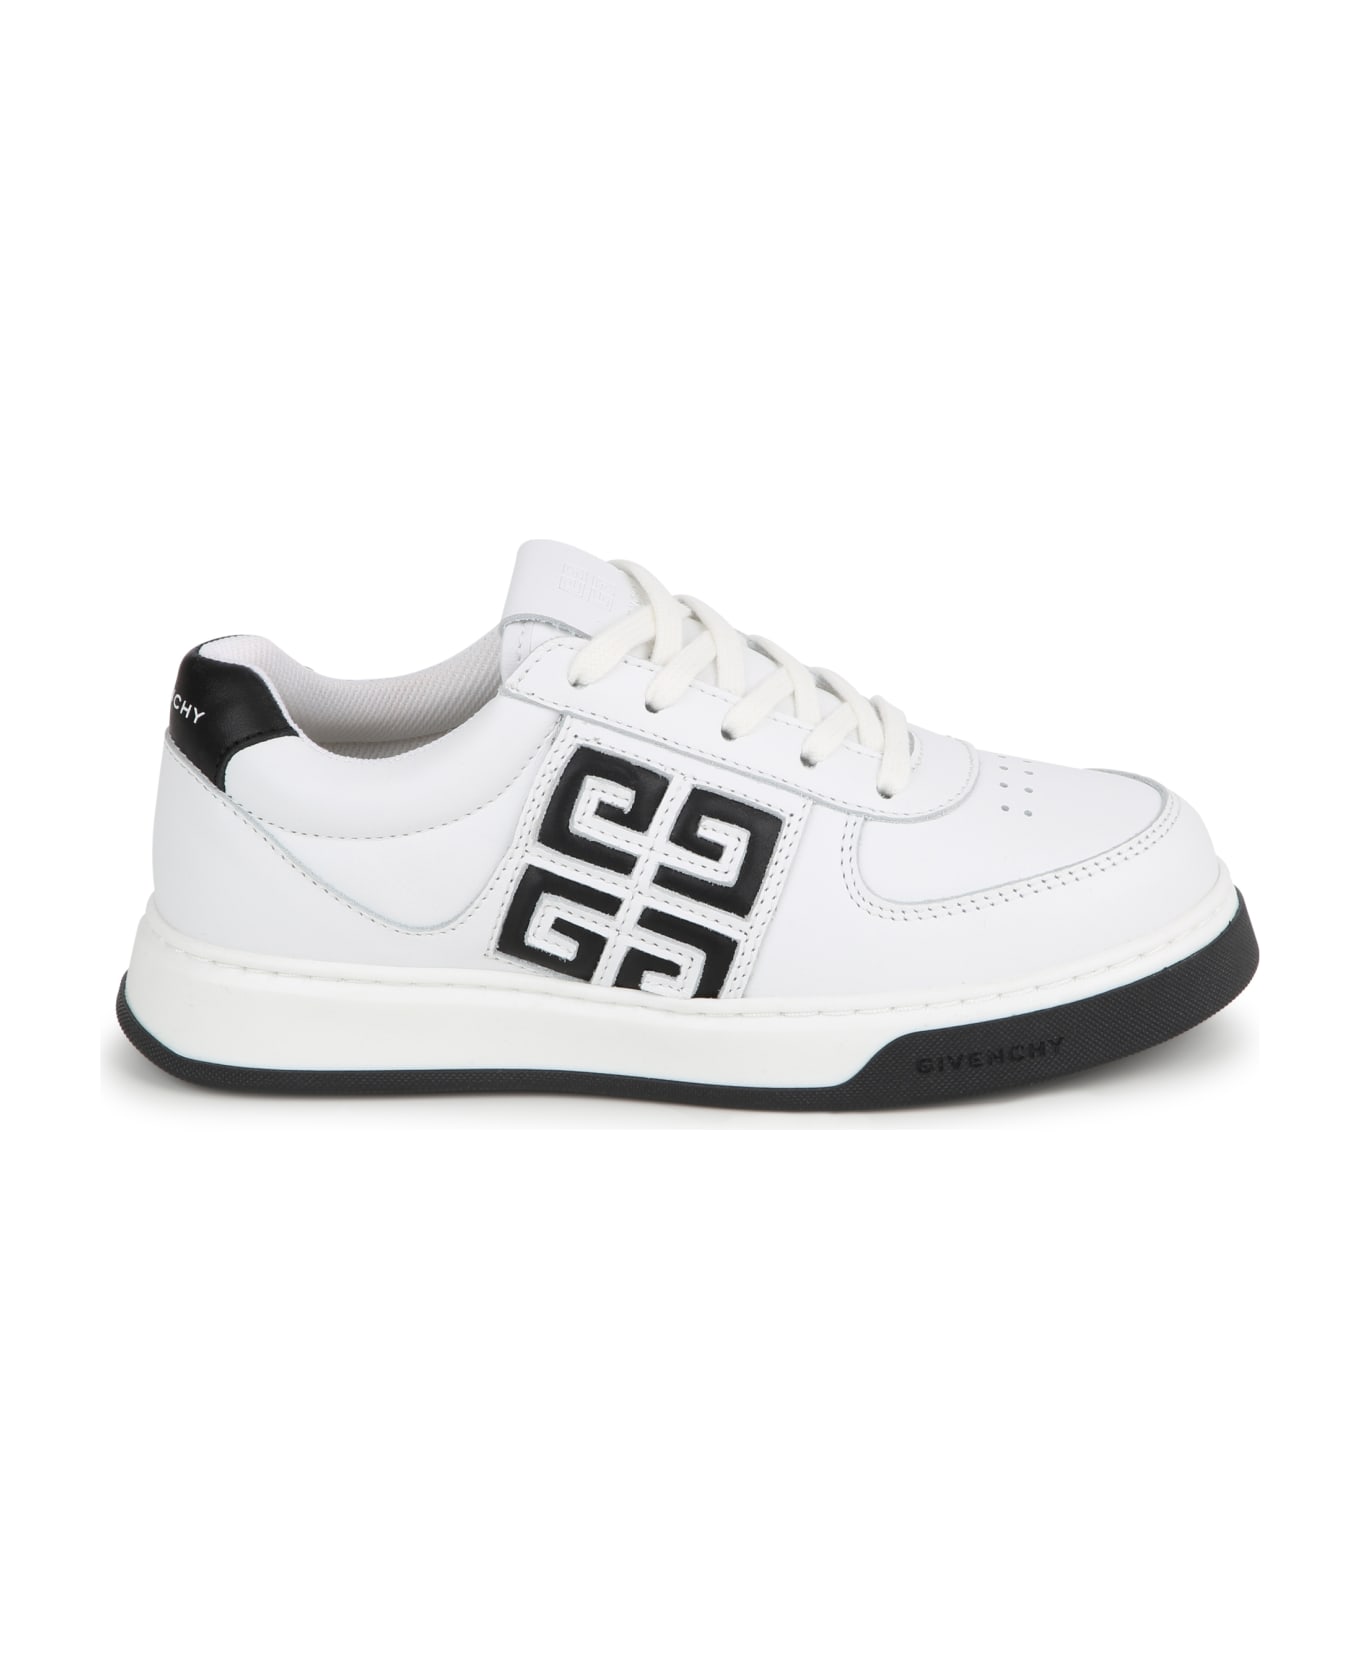 Givenchy 4g Leather Sneakers - Bianco シューズ